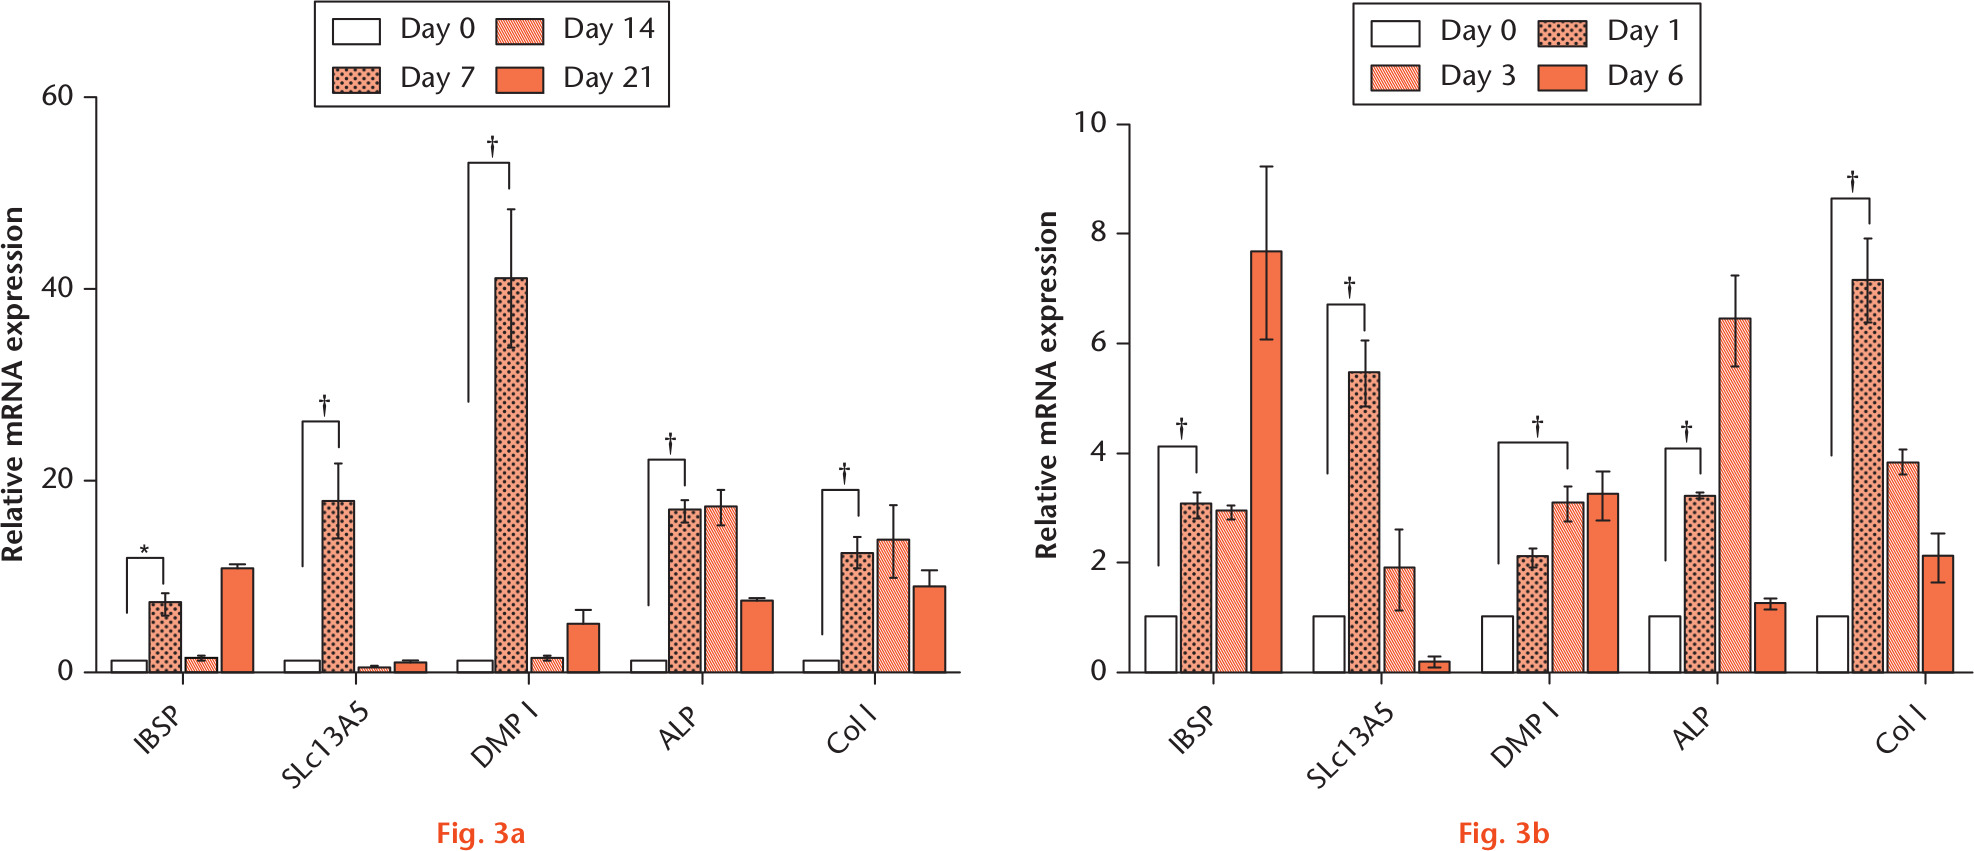  
          IBSP and SLc13A5 mRNA expressed during osteogenesis in vitro. a) MC3T3-E1 and b) 7F2 were cultured with and without differentiation medium. The total RNA was isolated at the indicated timepoint and subjected to RT-qPCR analysis. The relative expression was first normalized to that at each timepoint without differentiation medium and then the RNA level at day 0 was set equal to 1. The expression of DMP-1, ALP, and Col I were as positive controls for osteoblast (OB) differentiation. *p < 0.05. †p < 0.01.
        